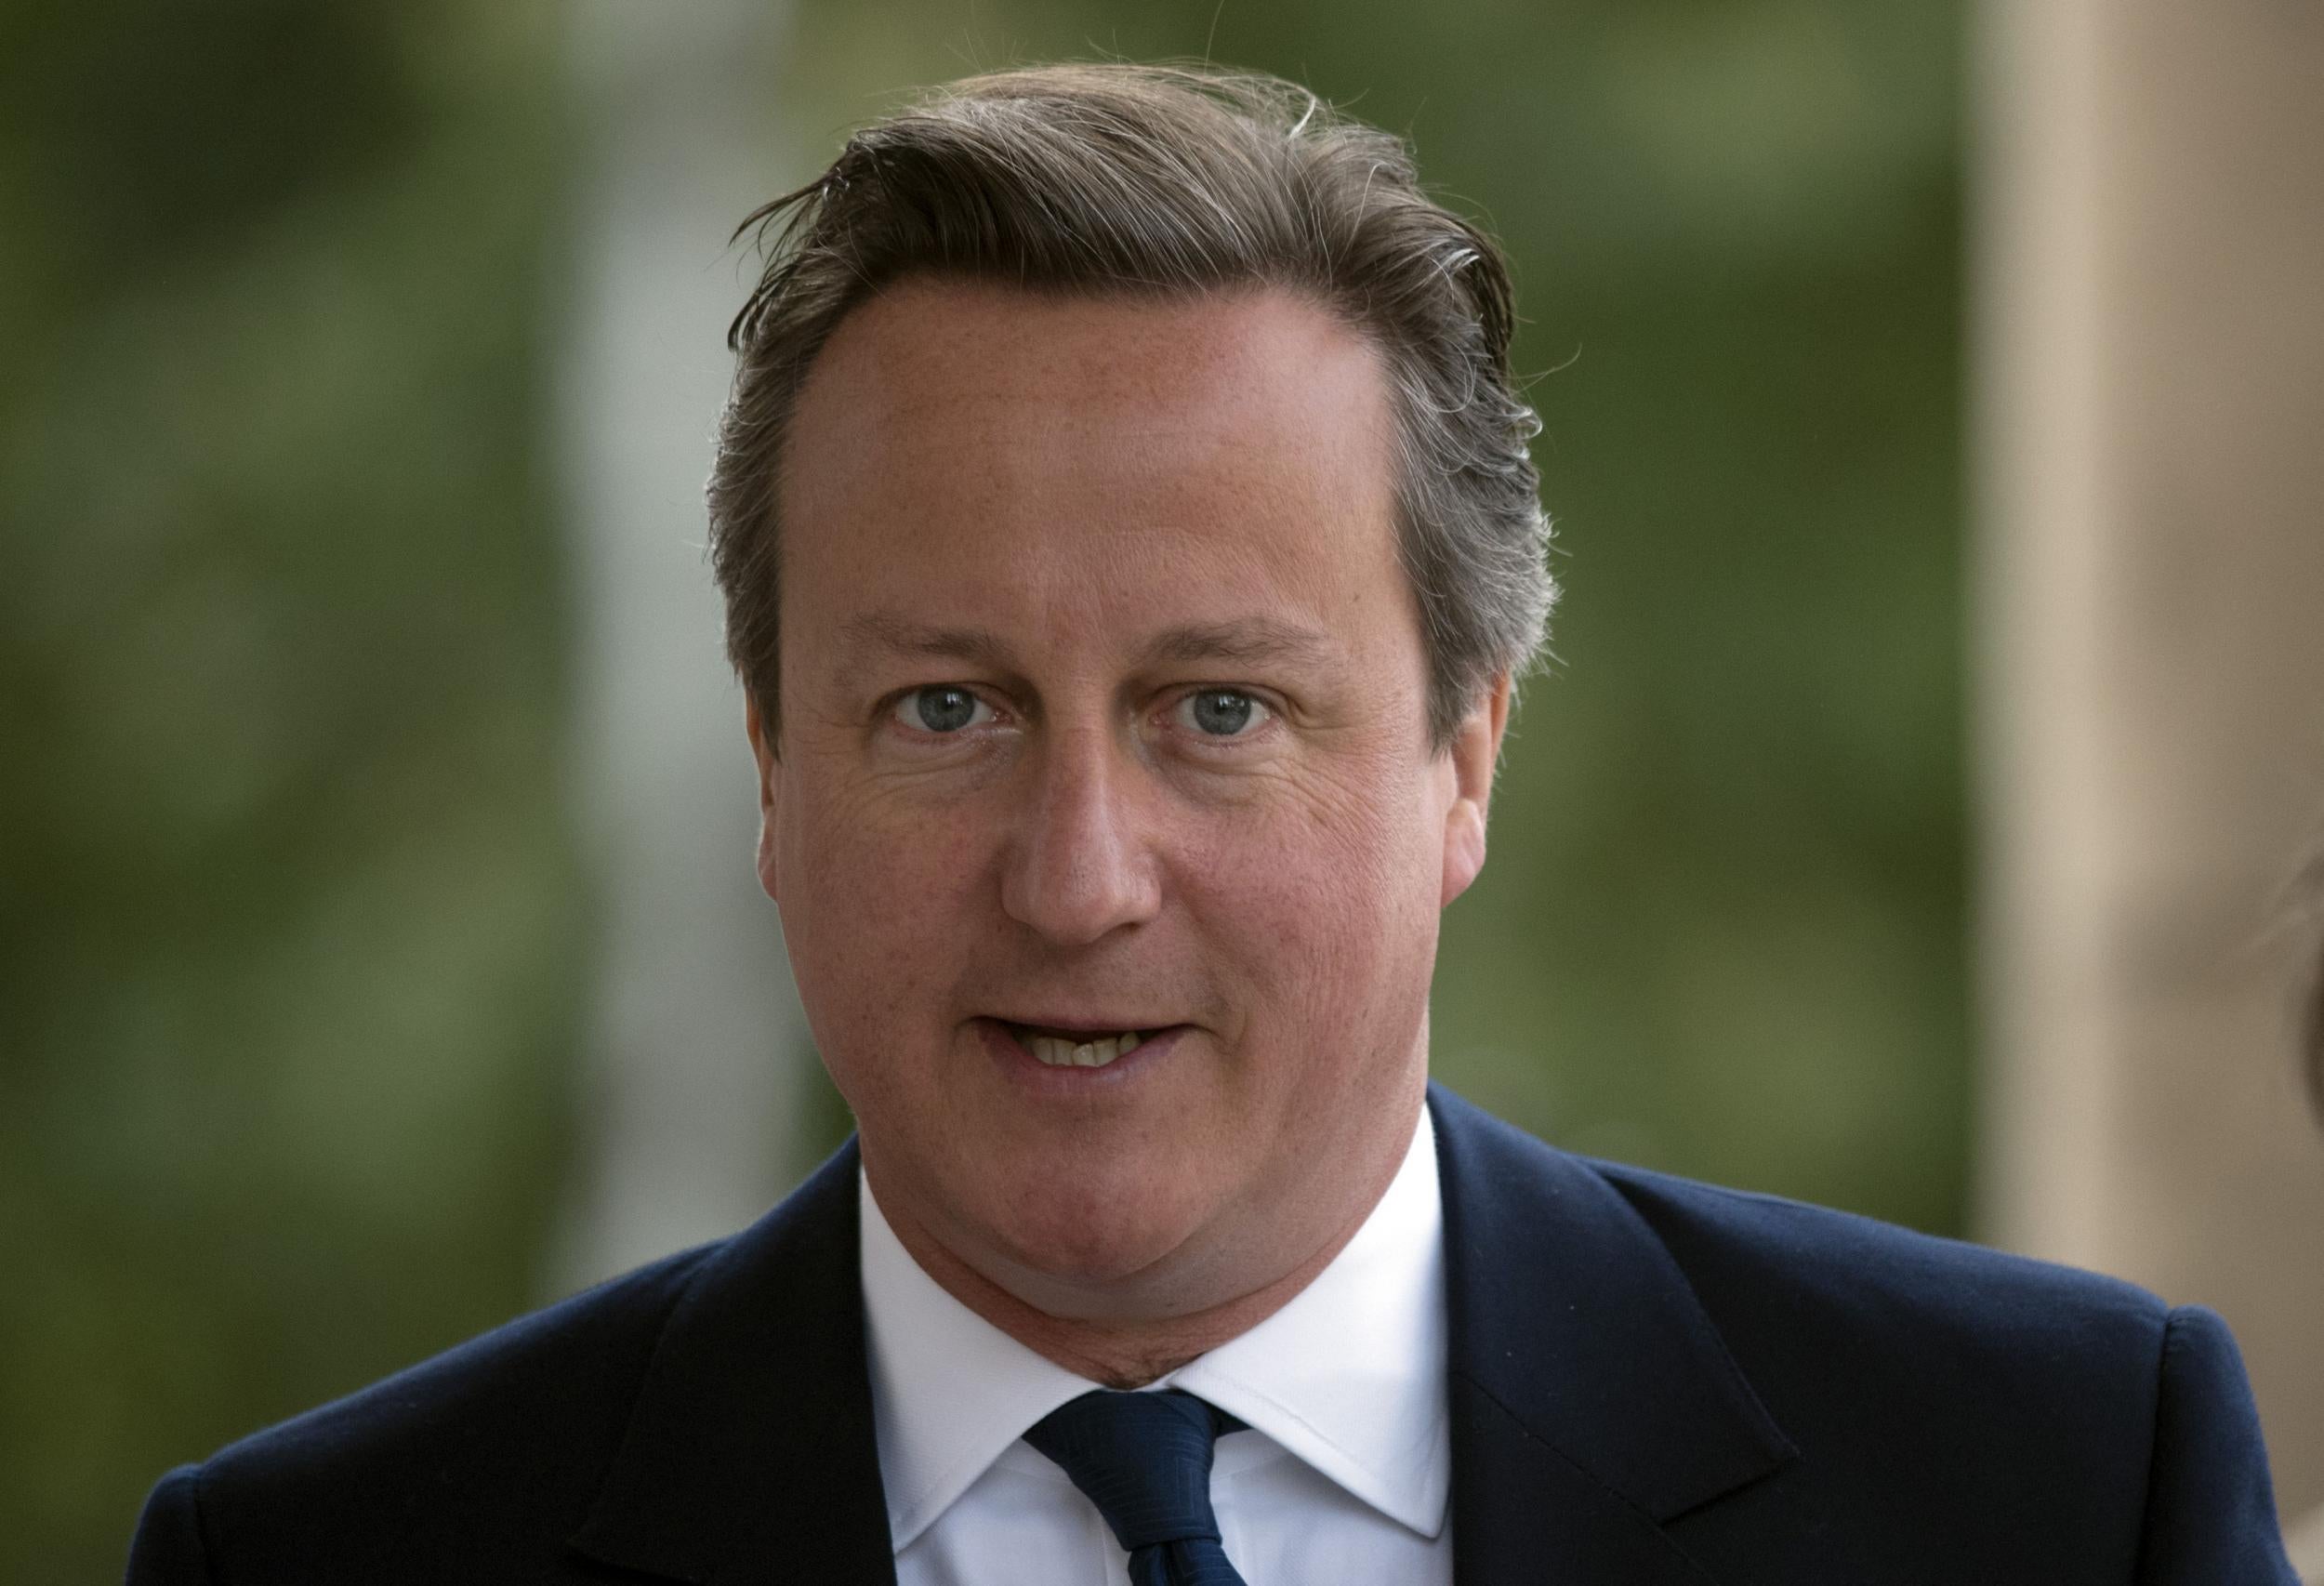 David Cameron has pledged to hold the EU referendum before the end of 2017